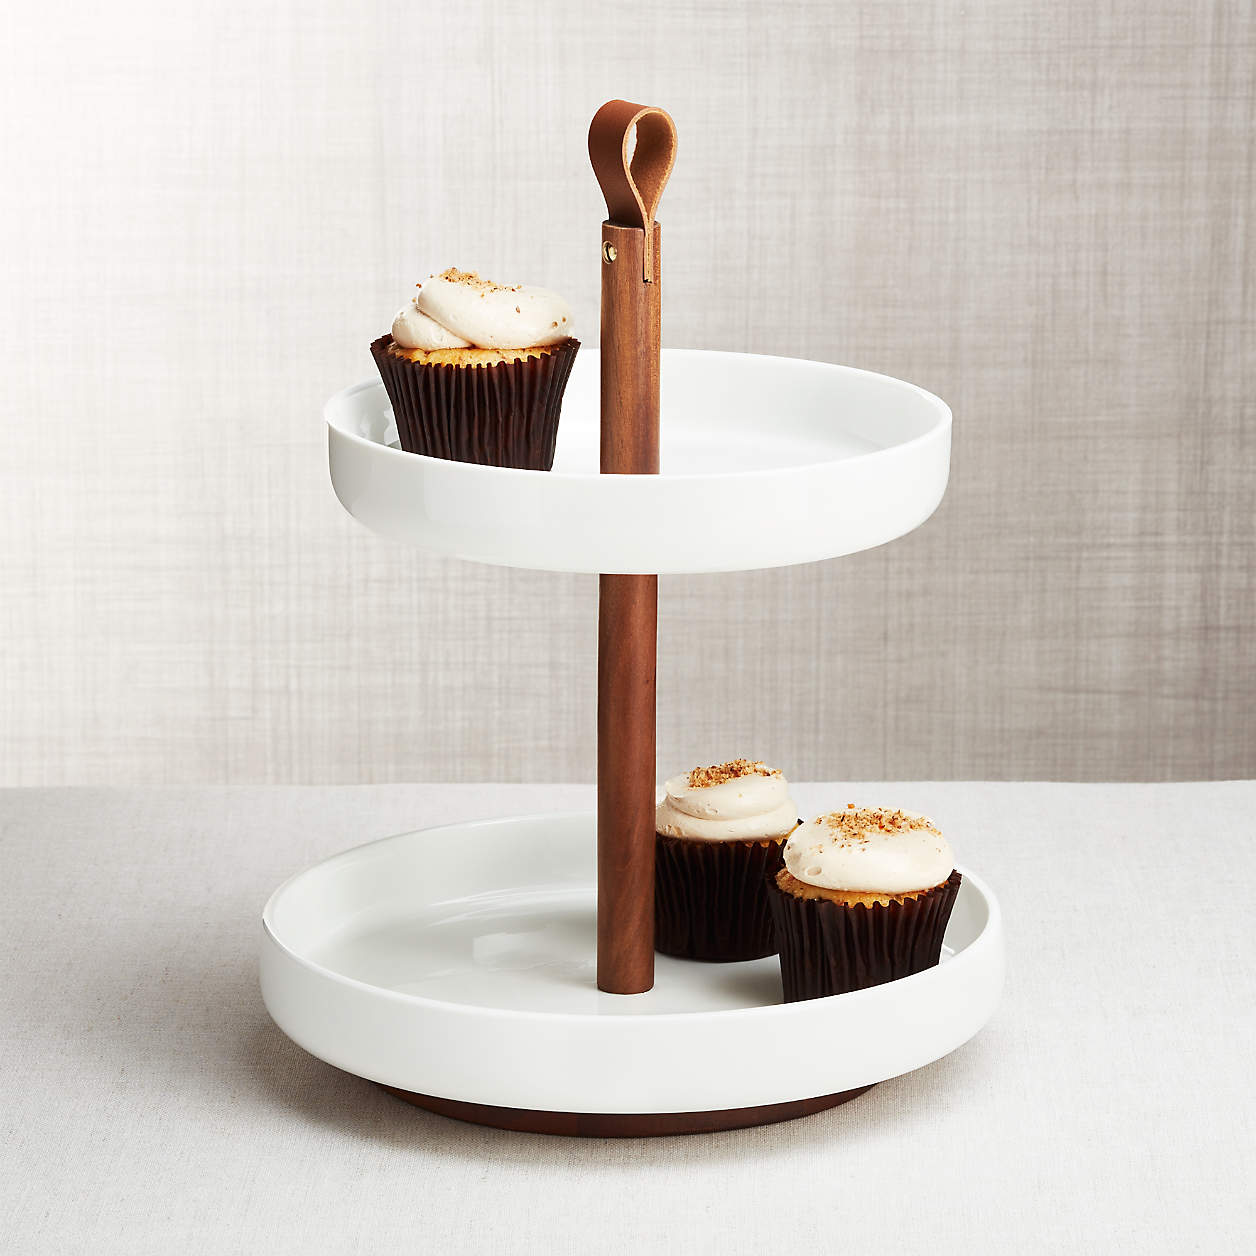 Crate and barrel cupcake stand